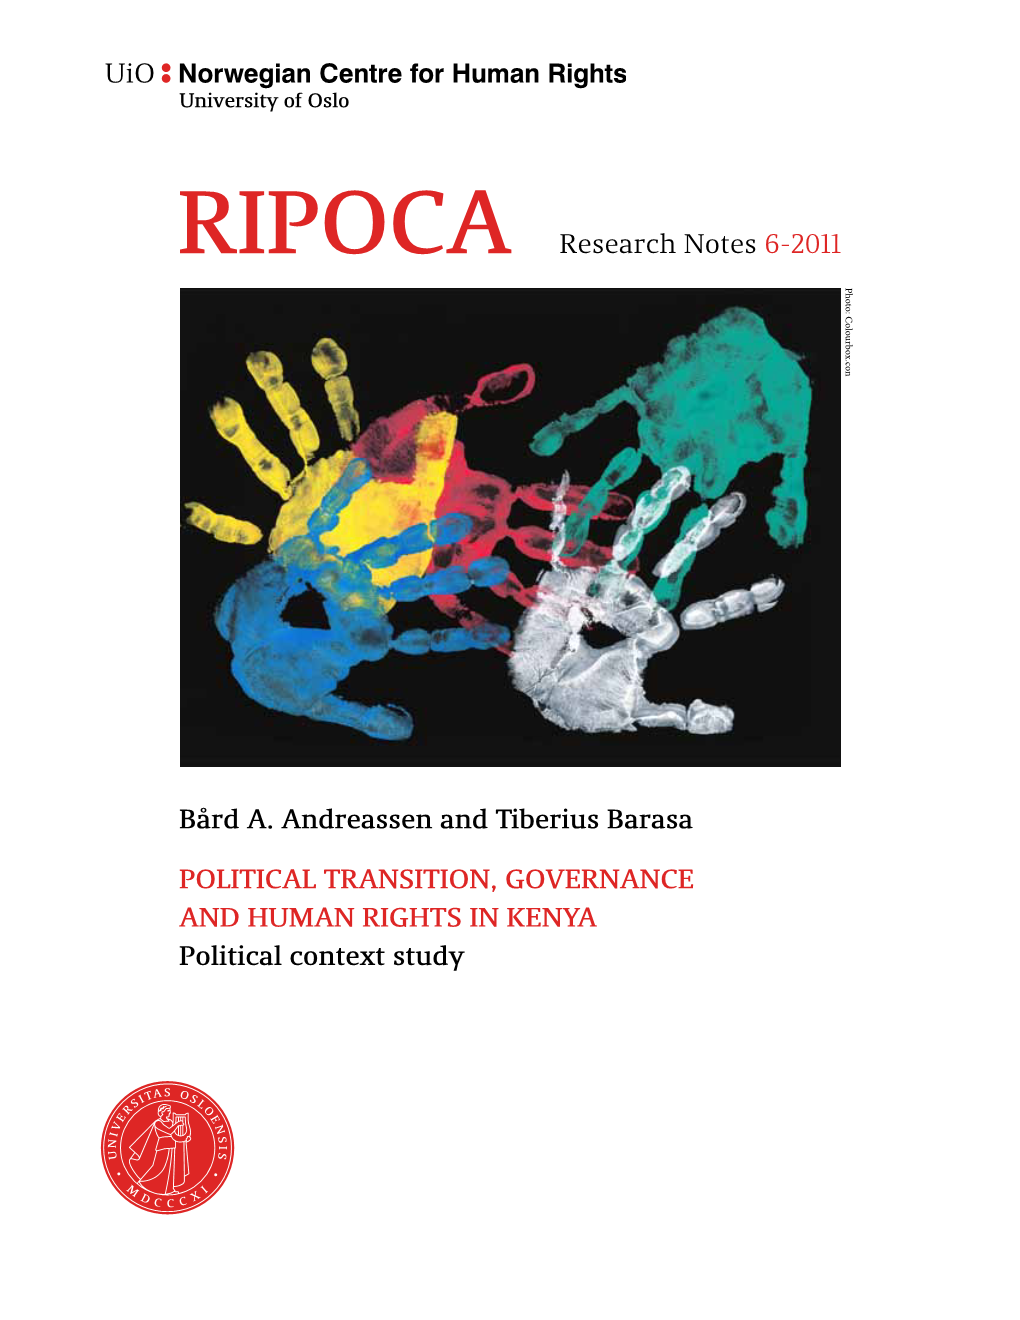 Political Transition, Governance and Human Rights in Kenya Political Context Study